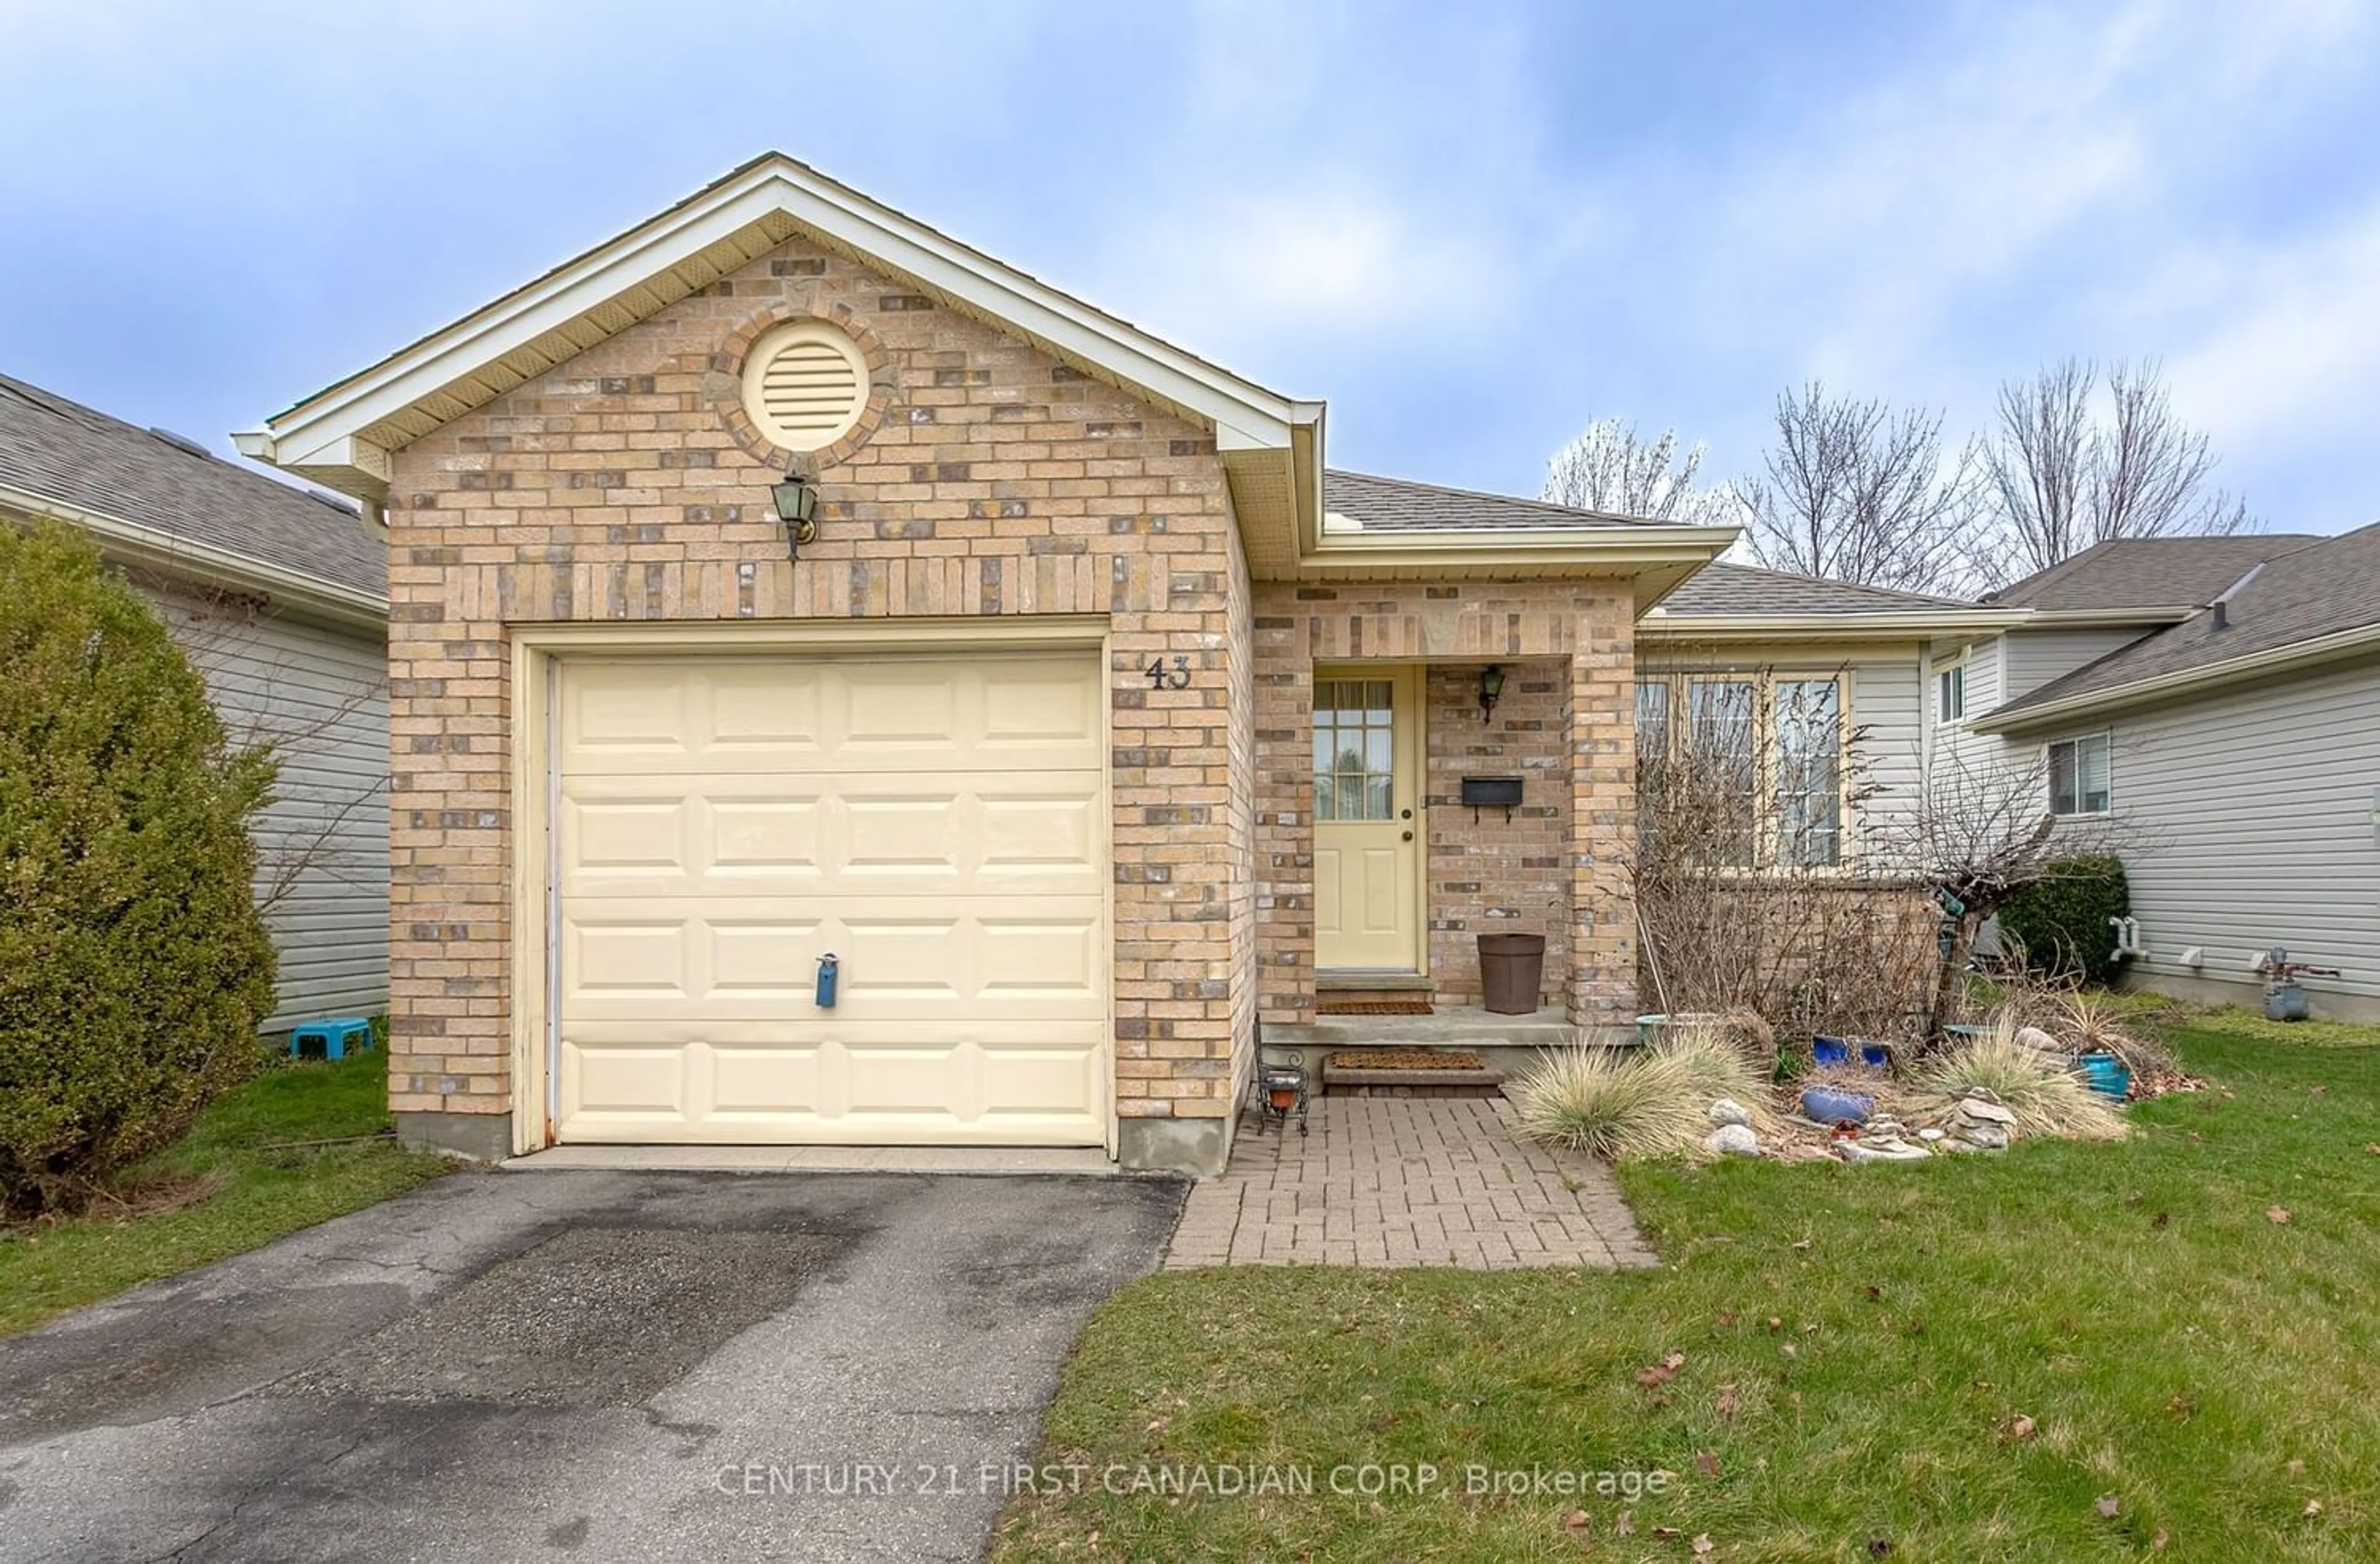 Frontside or backside of a home for 325 Lighthouse Rd #43, London Ontario N6M 1H8